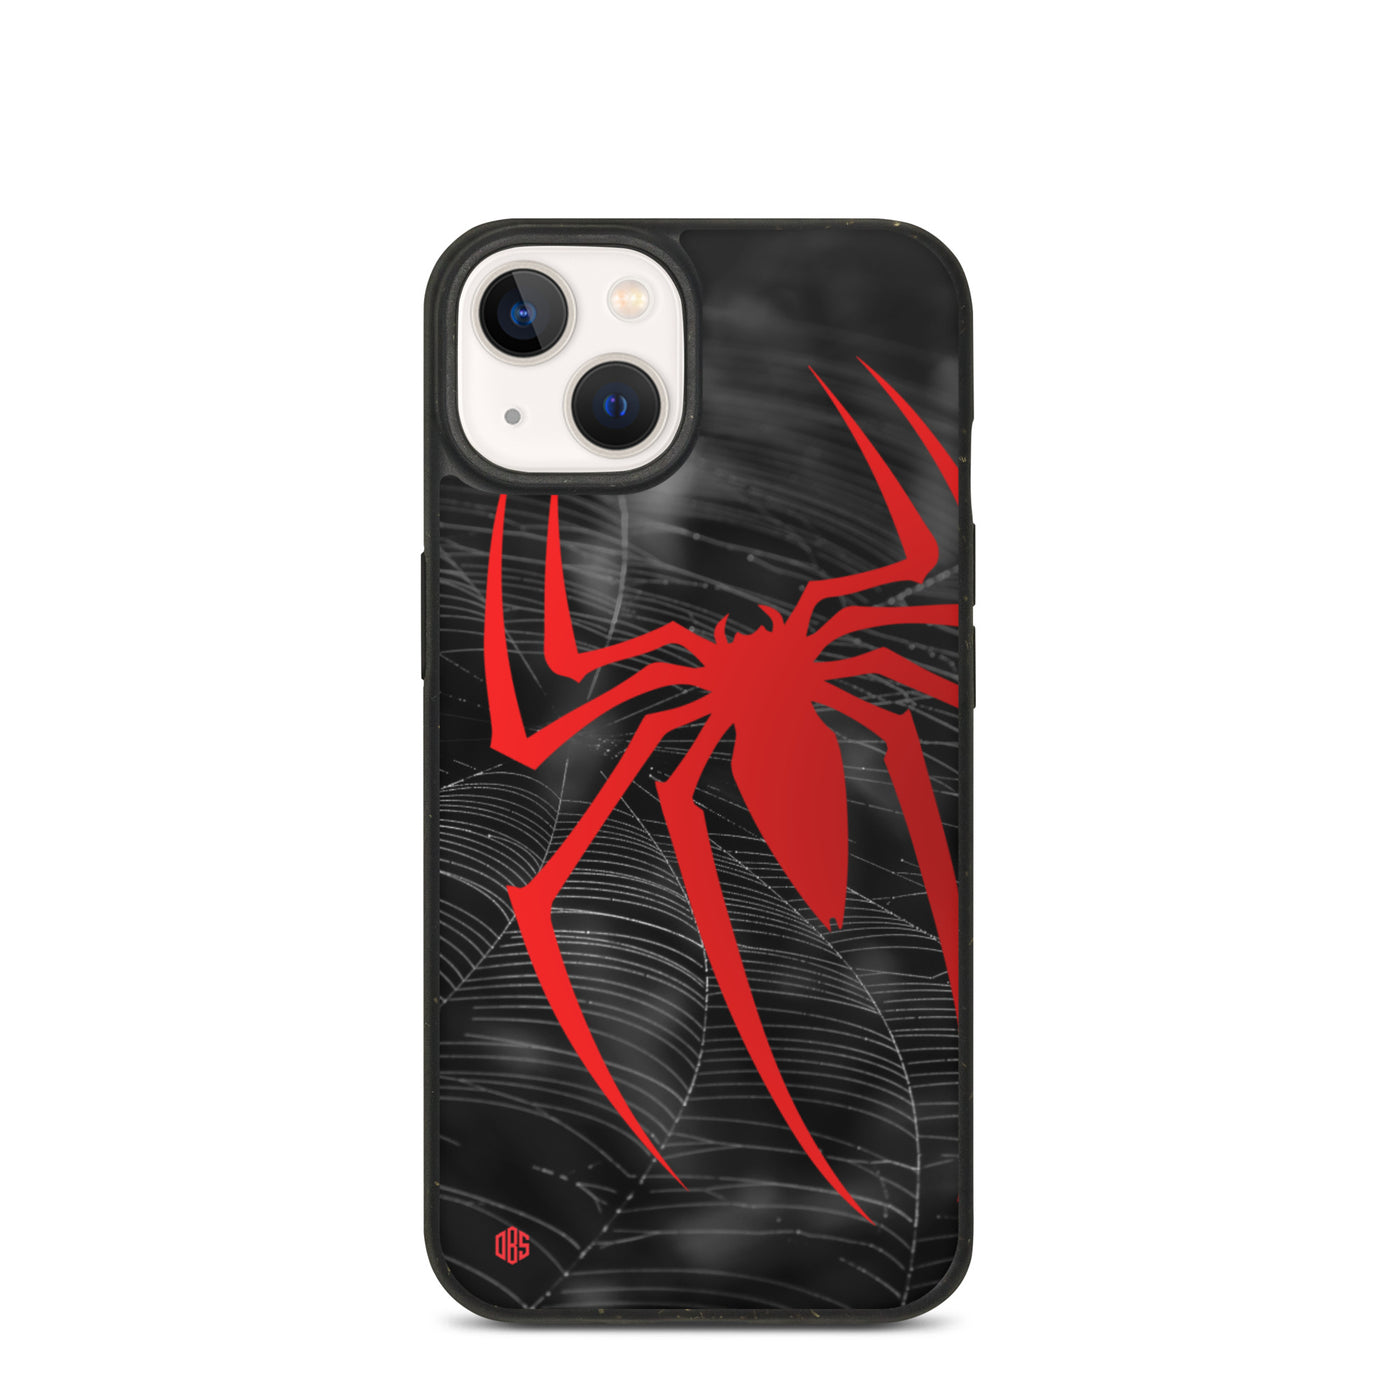 Spider Biodegradable iPhone Case